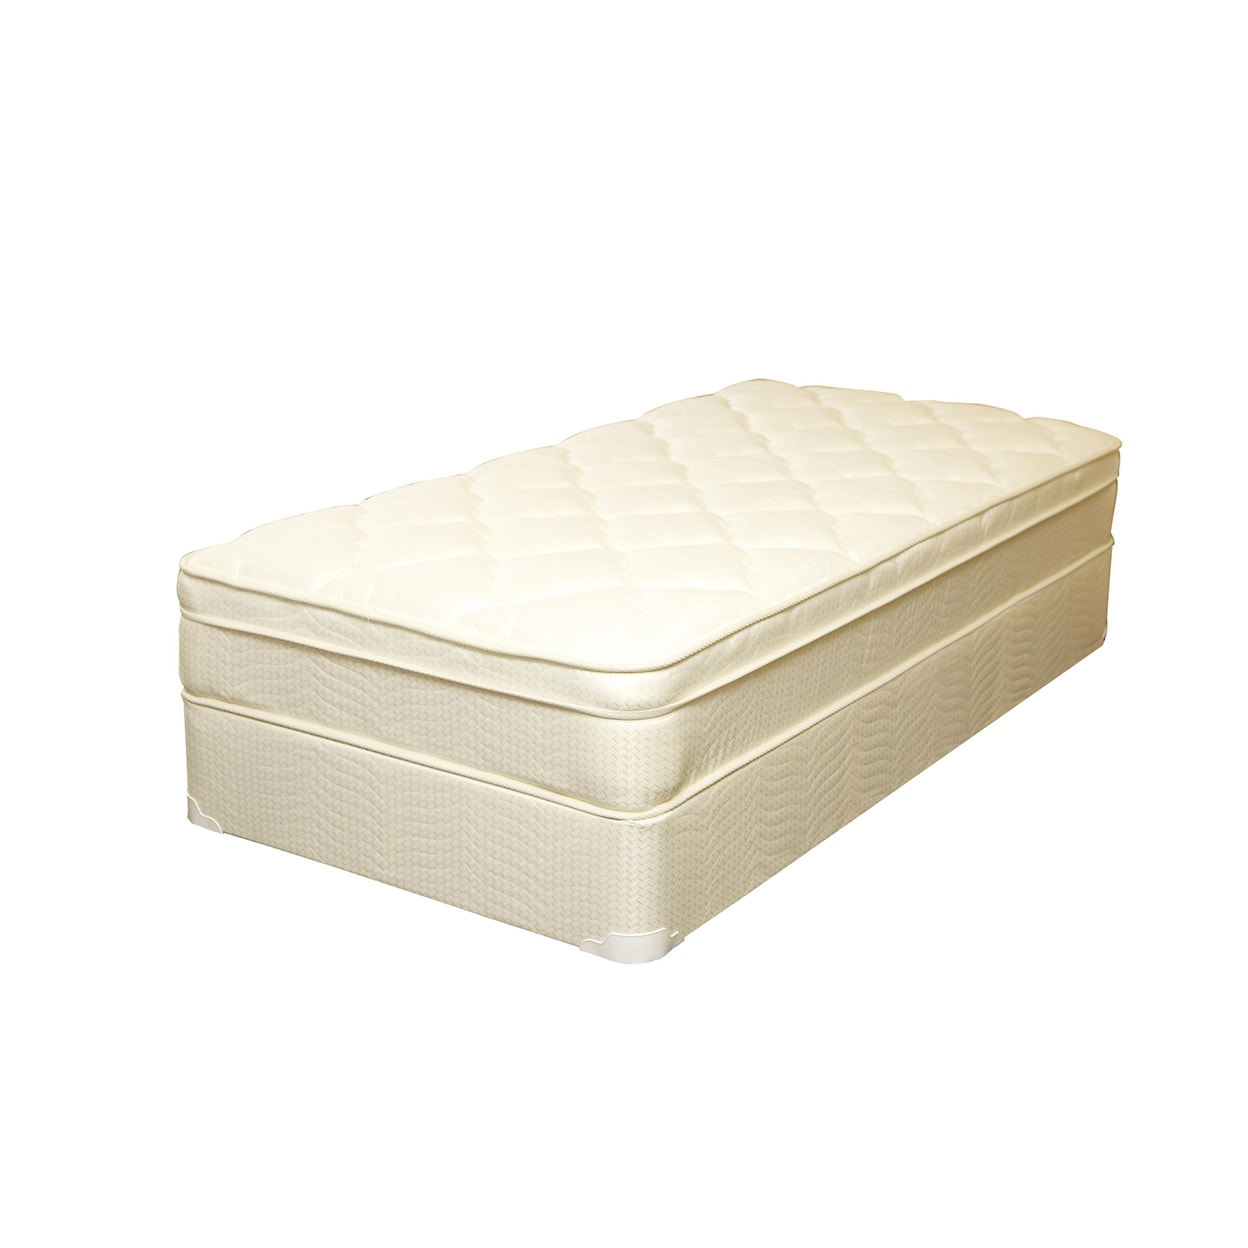 King Koil Spine Support - Camille Full Euro Top Mattress Set